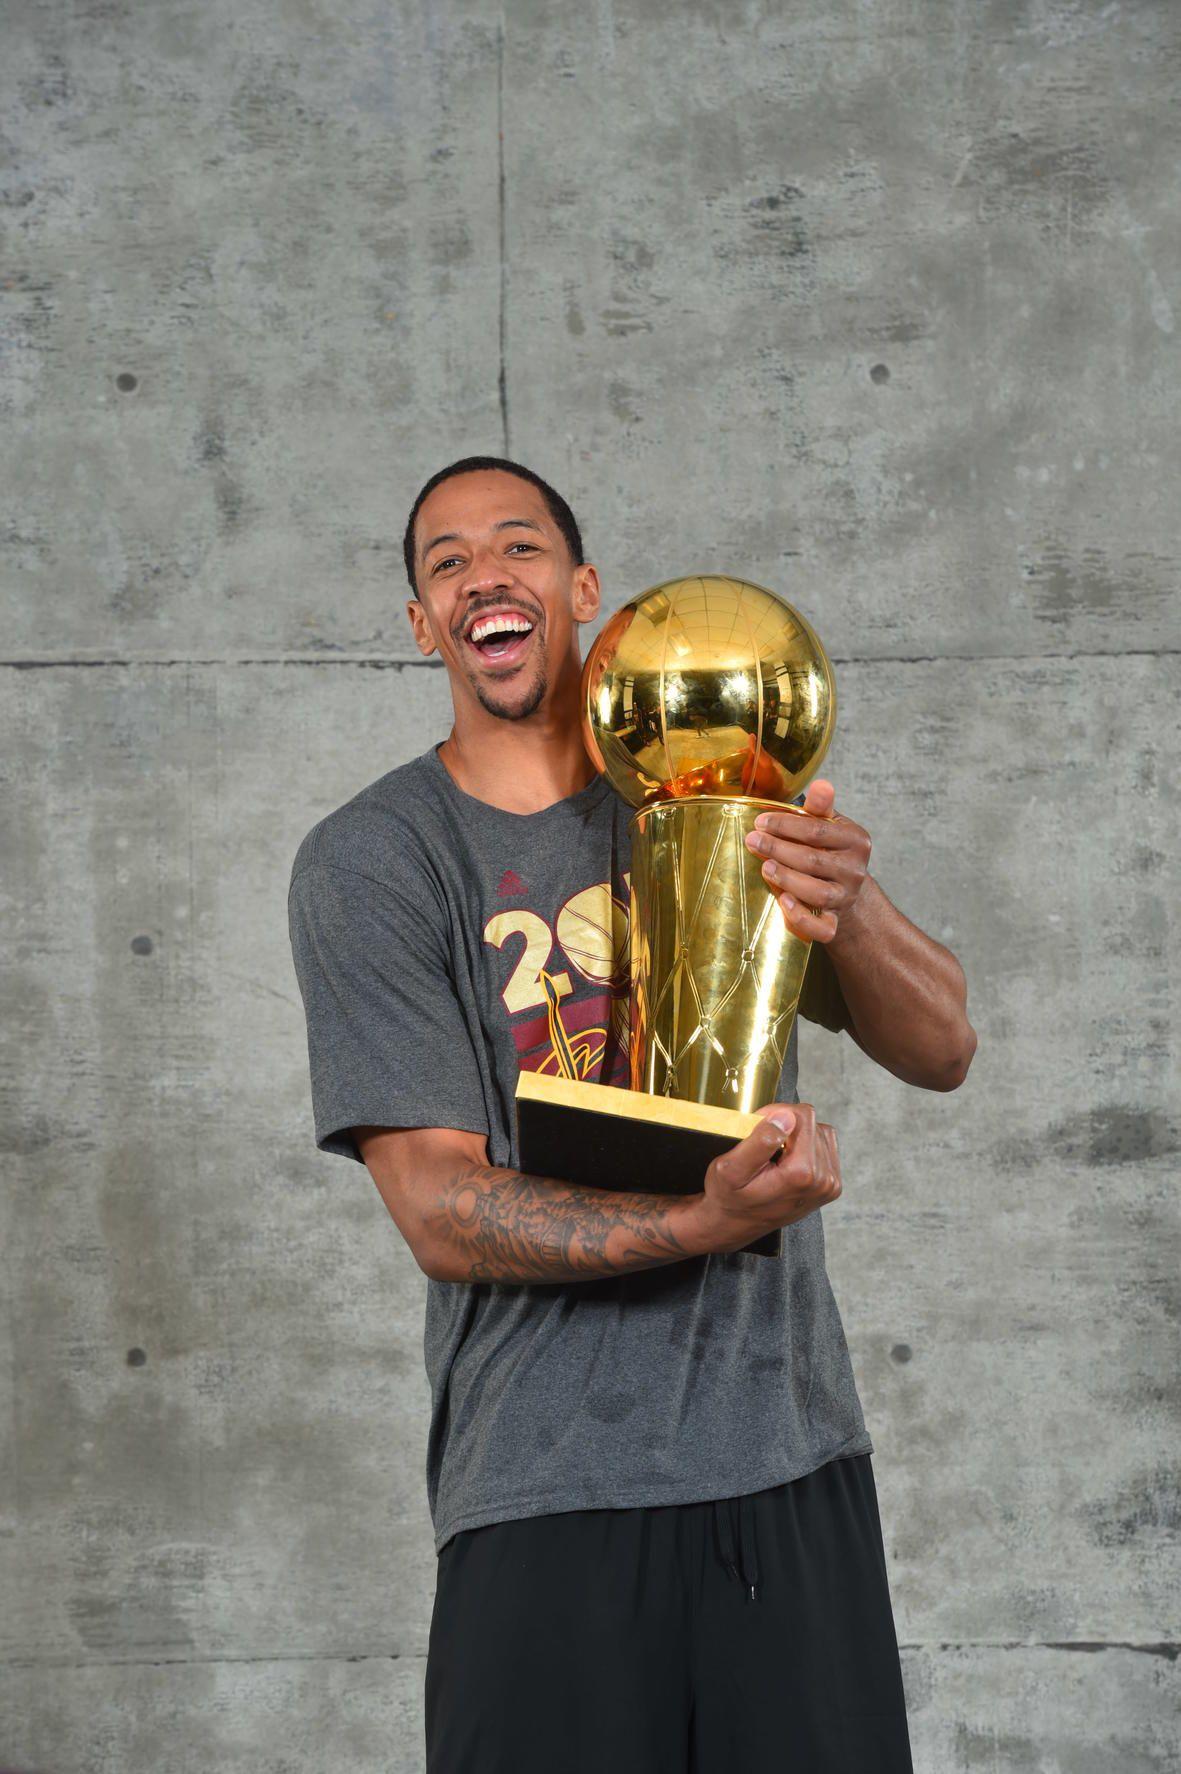 Photo for Channing Frye's 34th Birthday